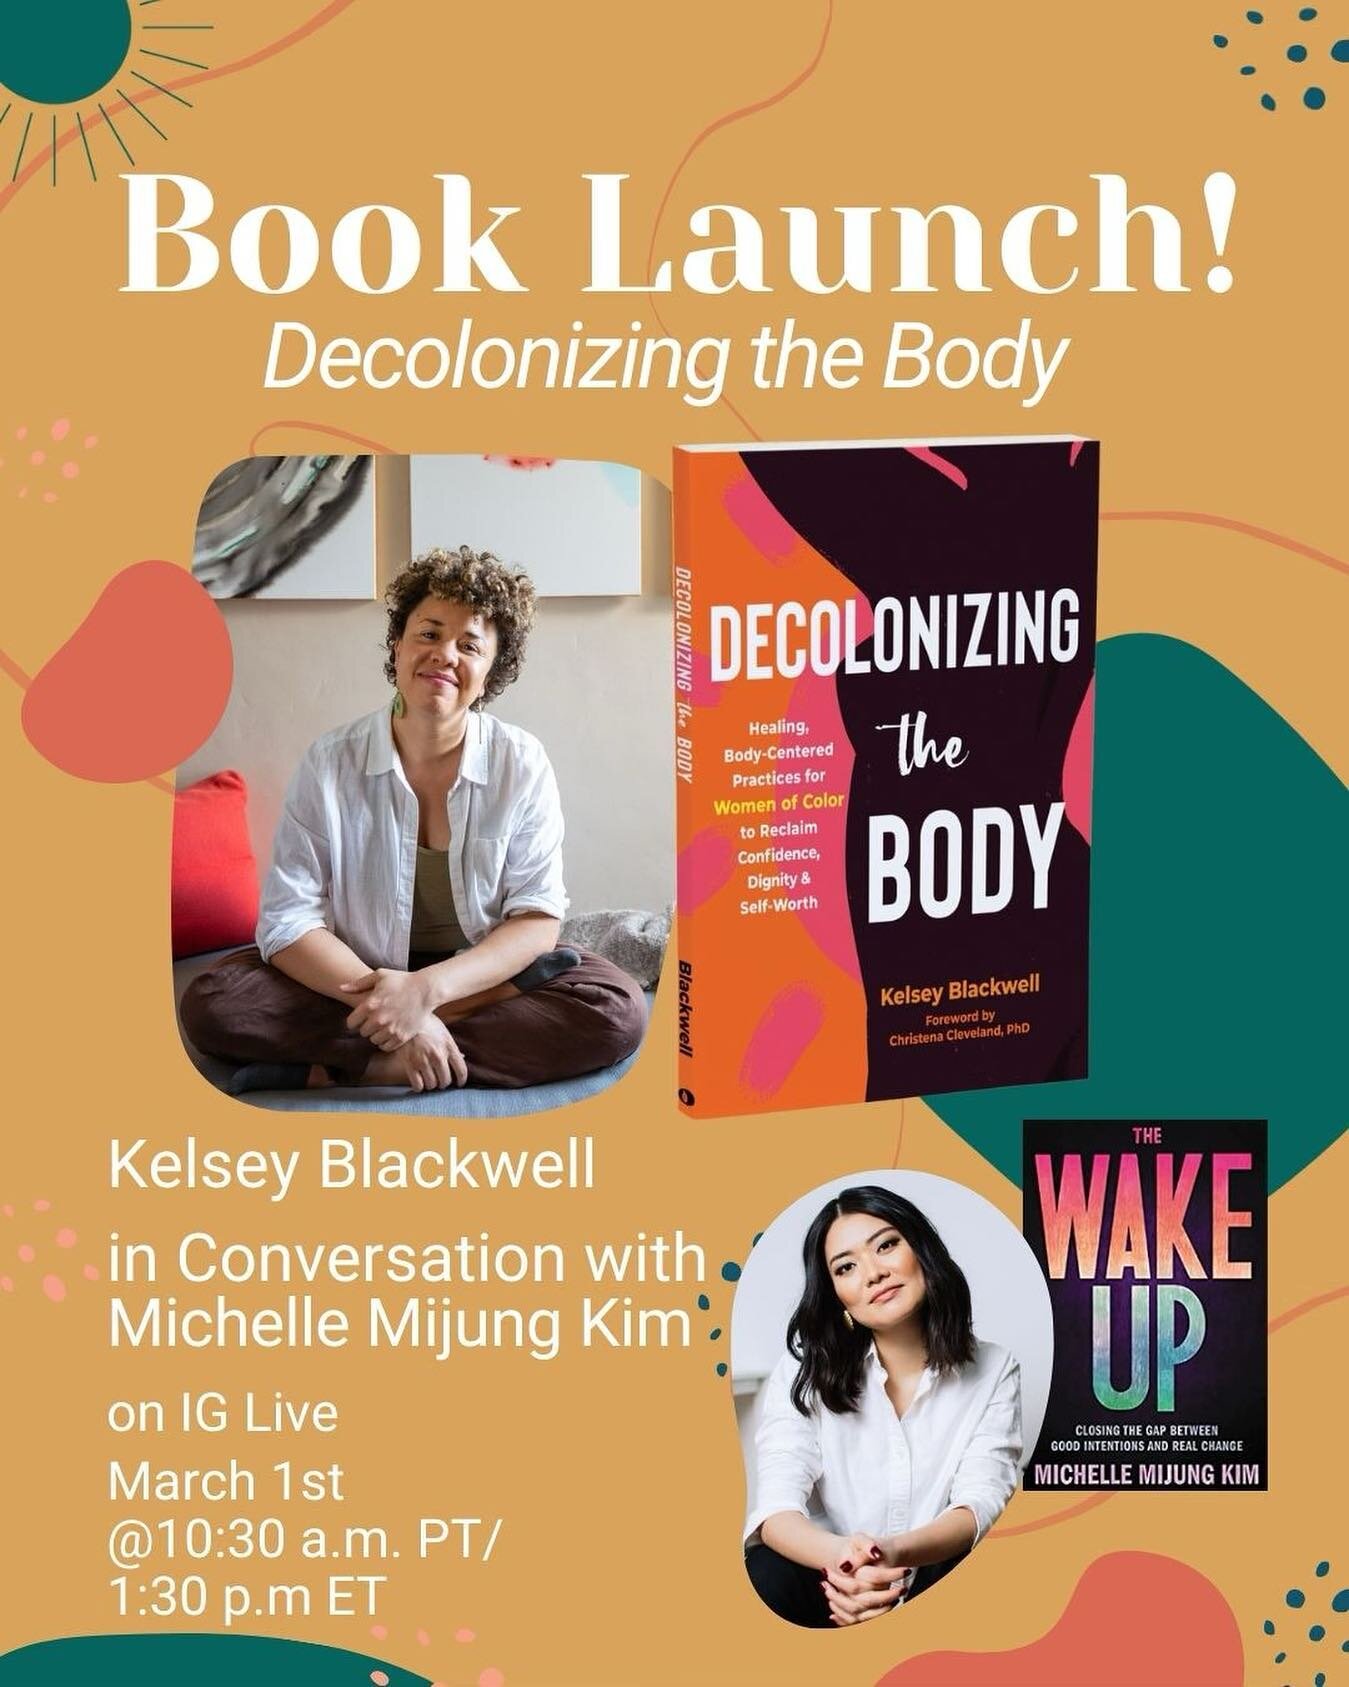 Ya&rsquo;ll! It&rsquo;s going down this Wednesday. 

I&rsquo;m sooooo excited to be launching this book in conversation with the incredible @michellekimkim ❗️

All bodies are welcome👏🏽😊

Join us? In addition to what I&rsquo;m sure will be a great 